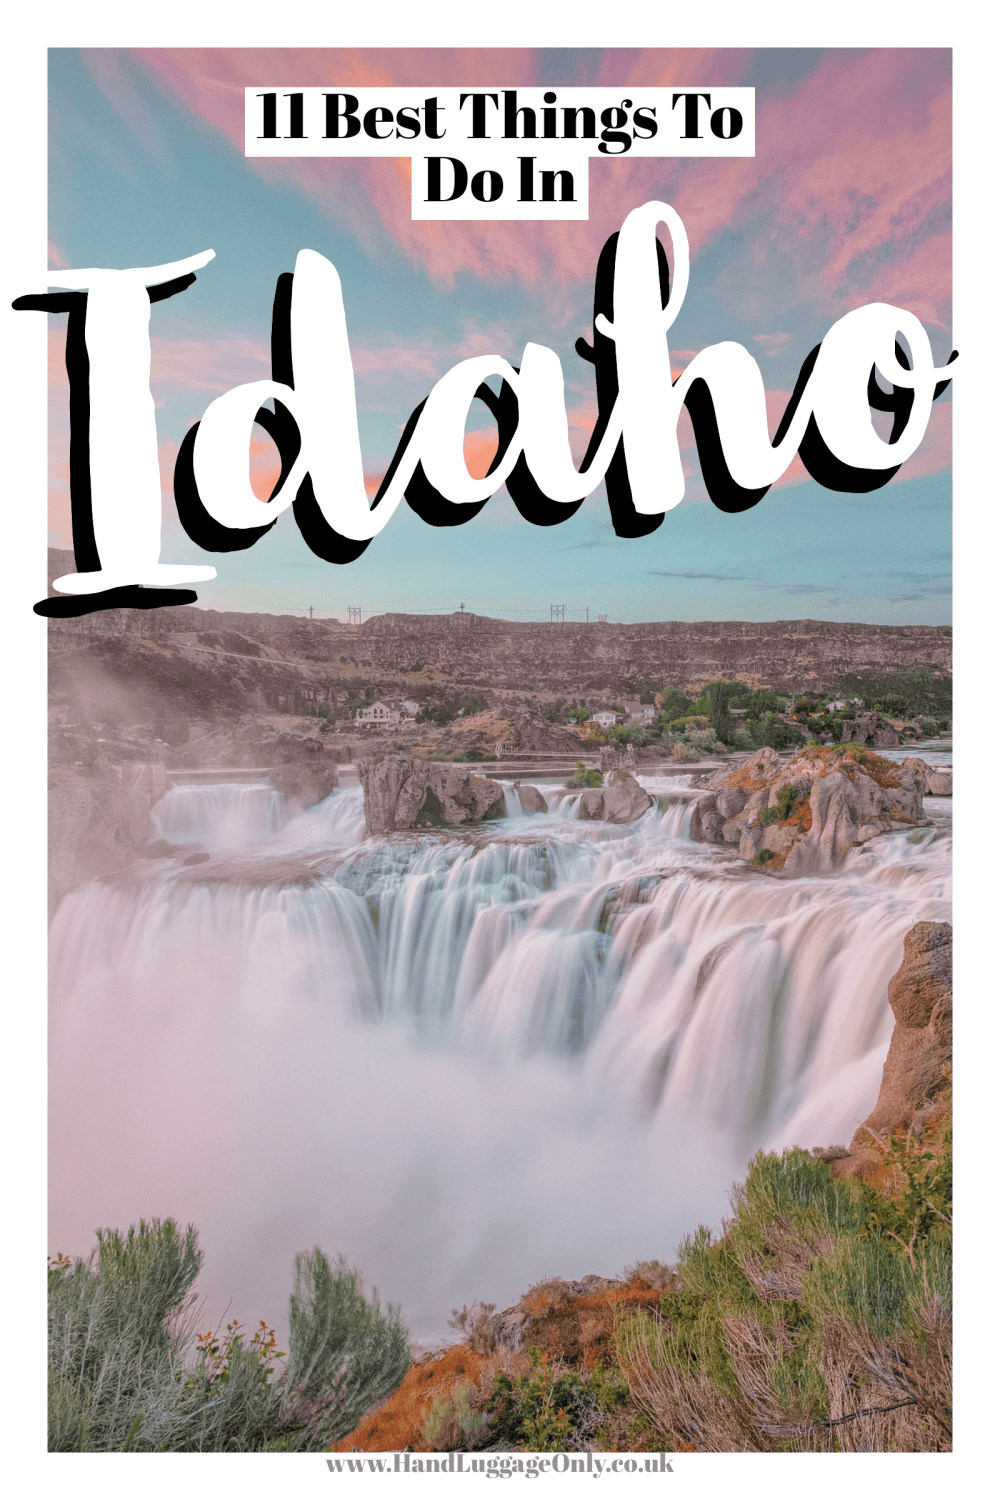 Best Things To Do In Idaho (1)